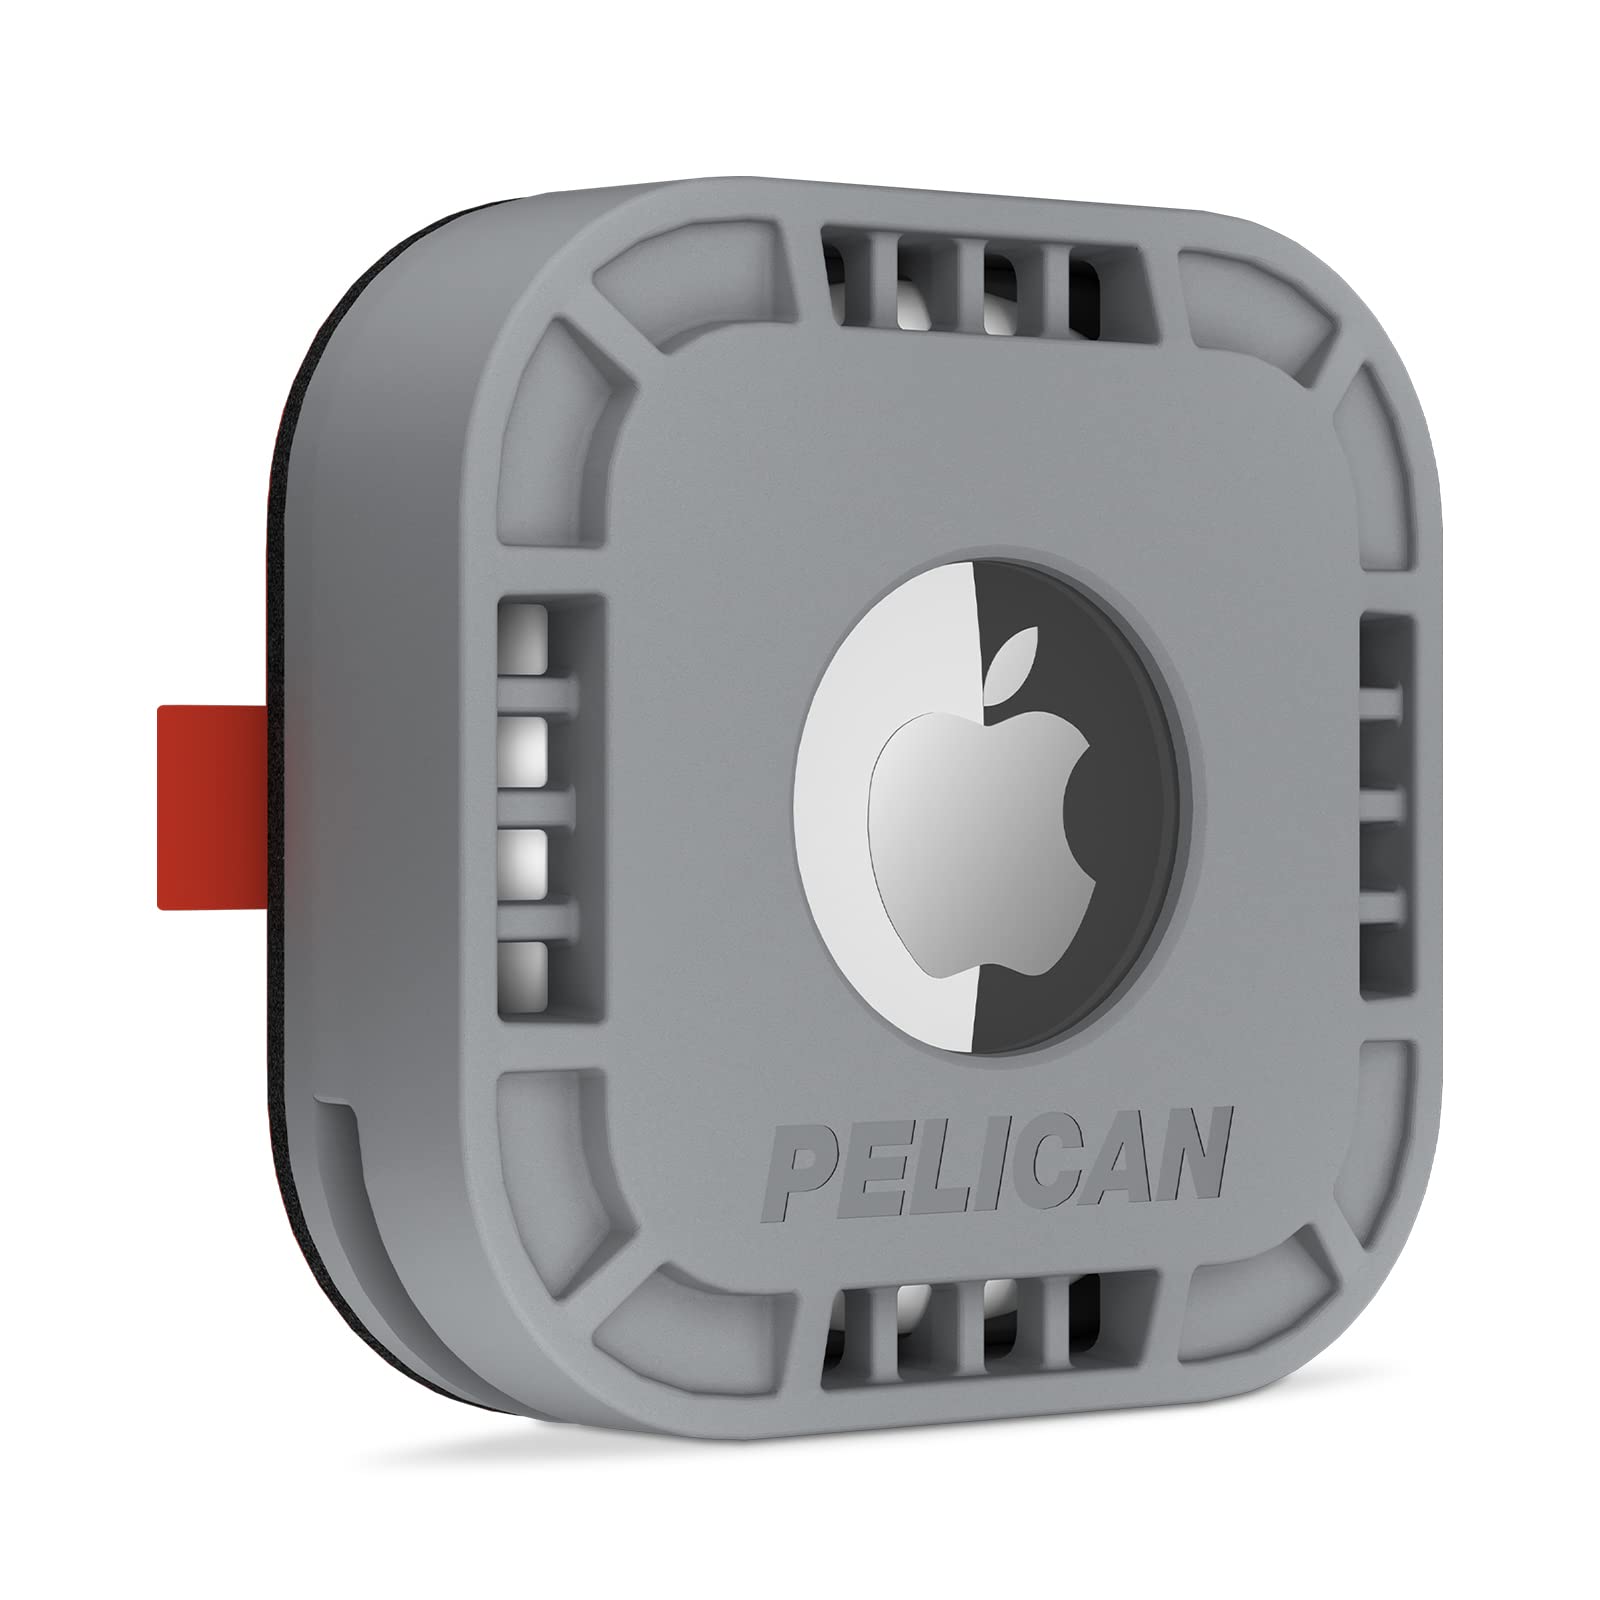 Pelican Protector AirTag Holder is the Best Versatile Apple AirTag Accessory